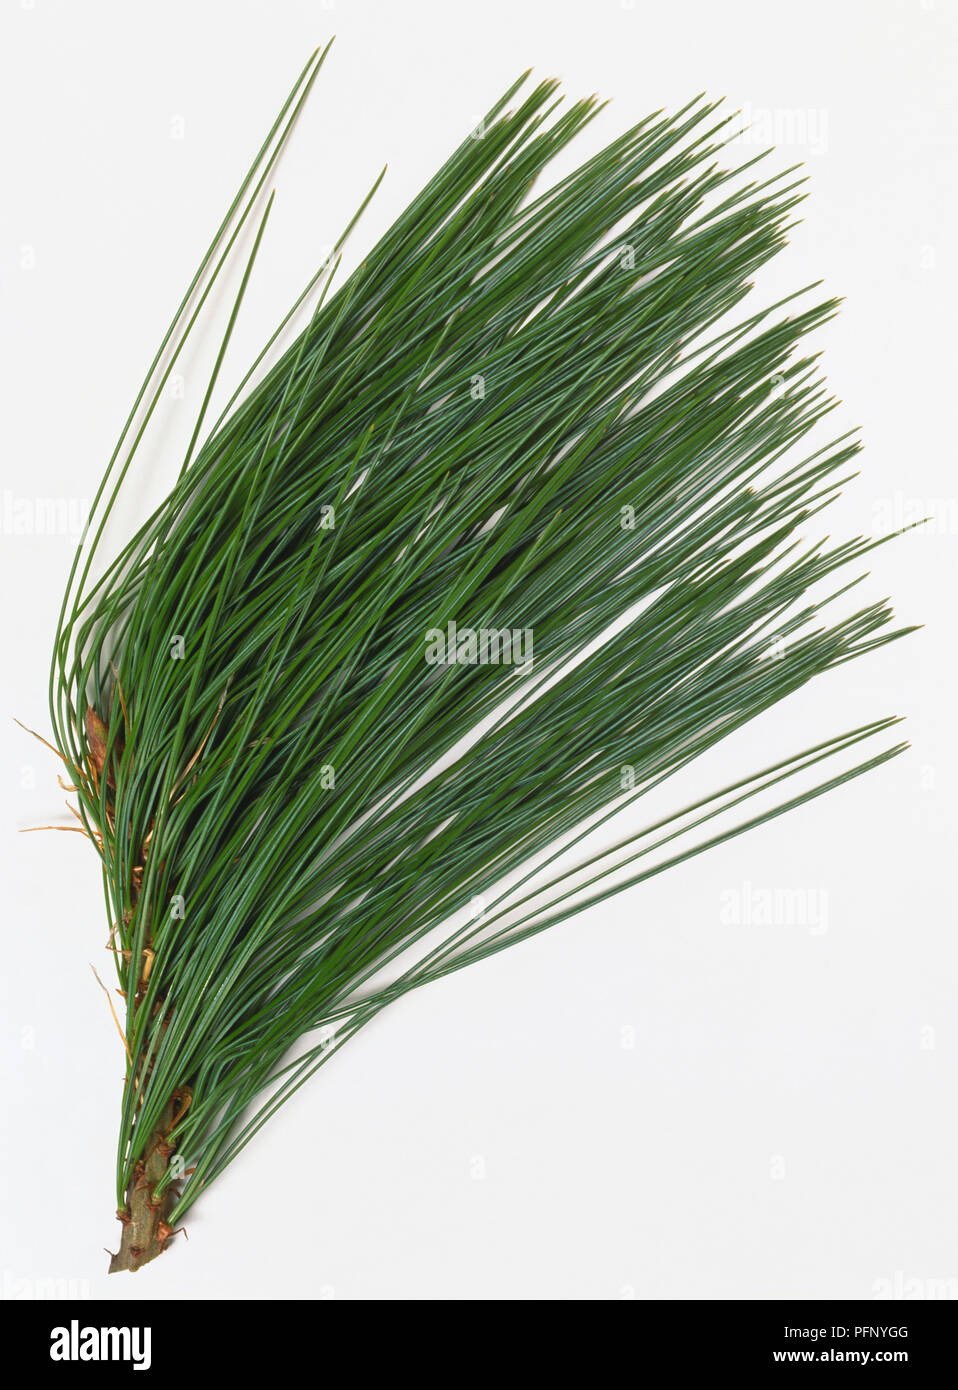 Pinaceae, Mexican White Pine, Mexican White Pine, brey stem with very long, needle-like, curved leaves drooping on shoots. Stock Photo